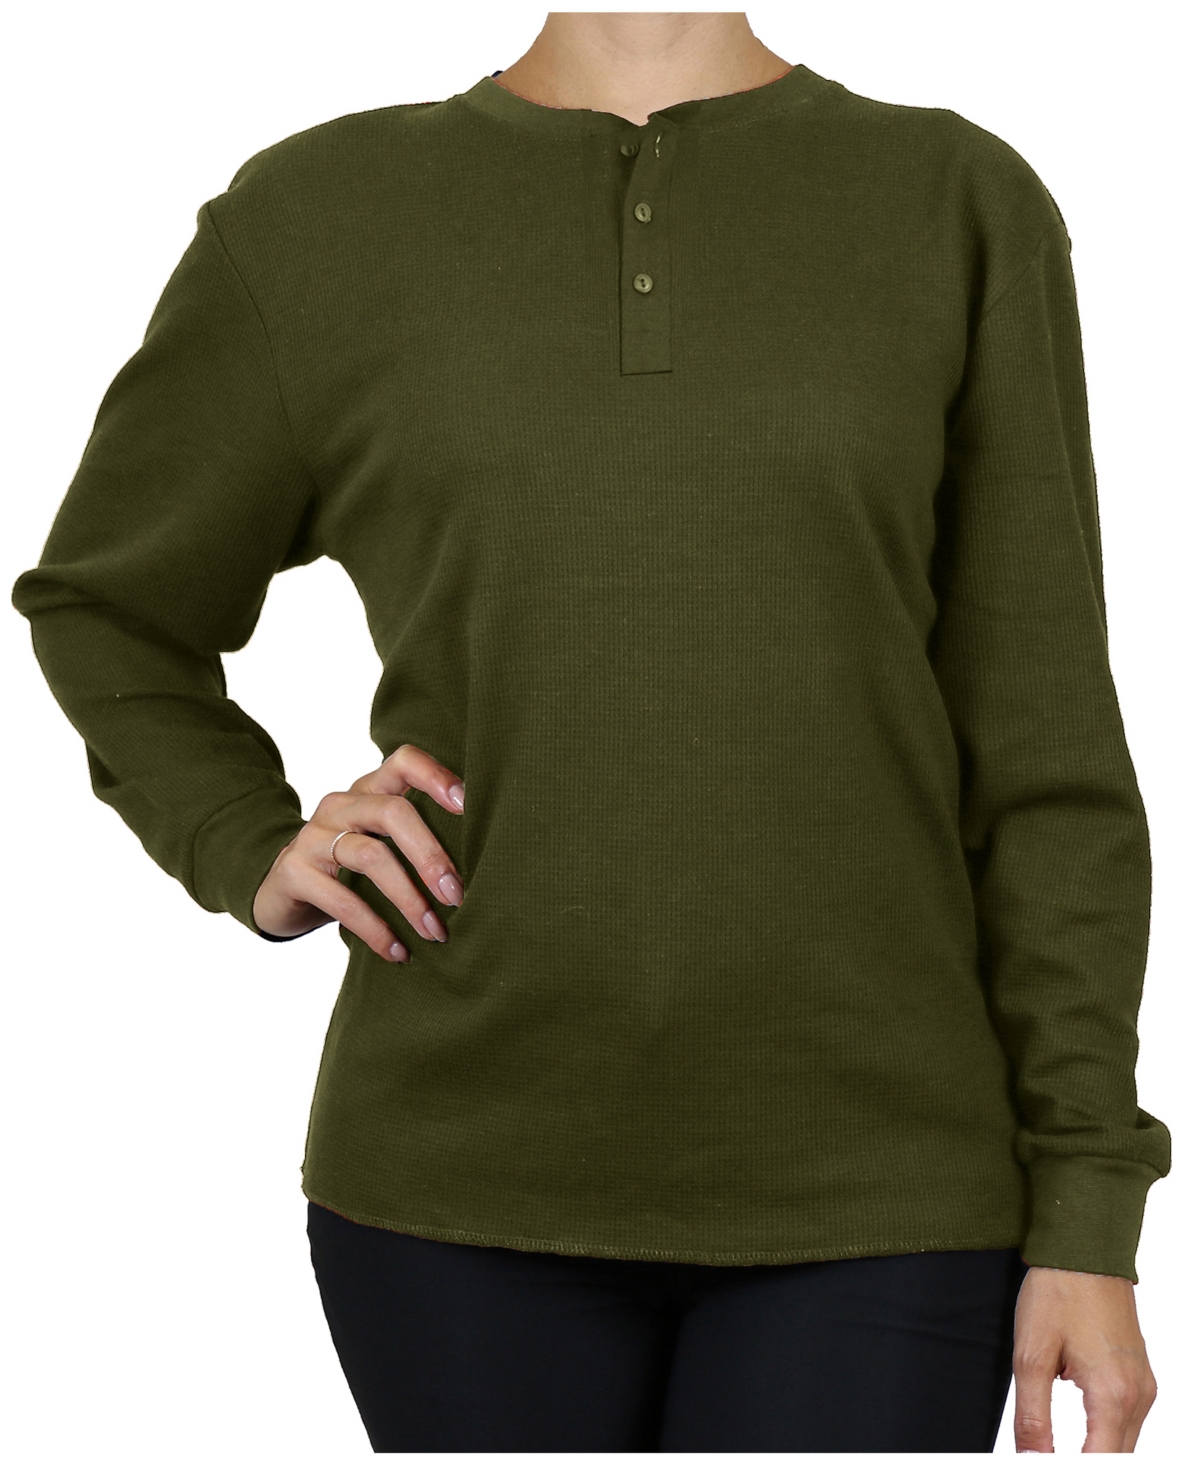 Galaxy By Harvic Women's Oversize Loose Fitting Waffle-knit Henley Thermal Sweater In Olive